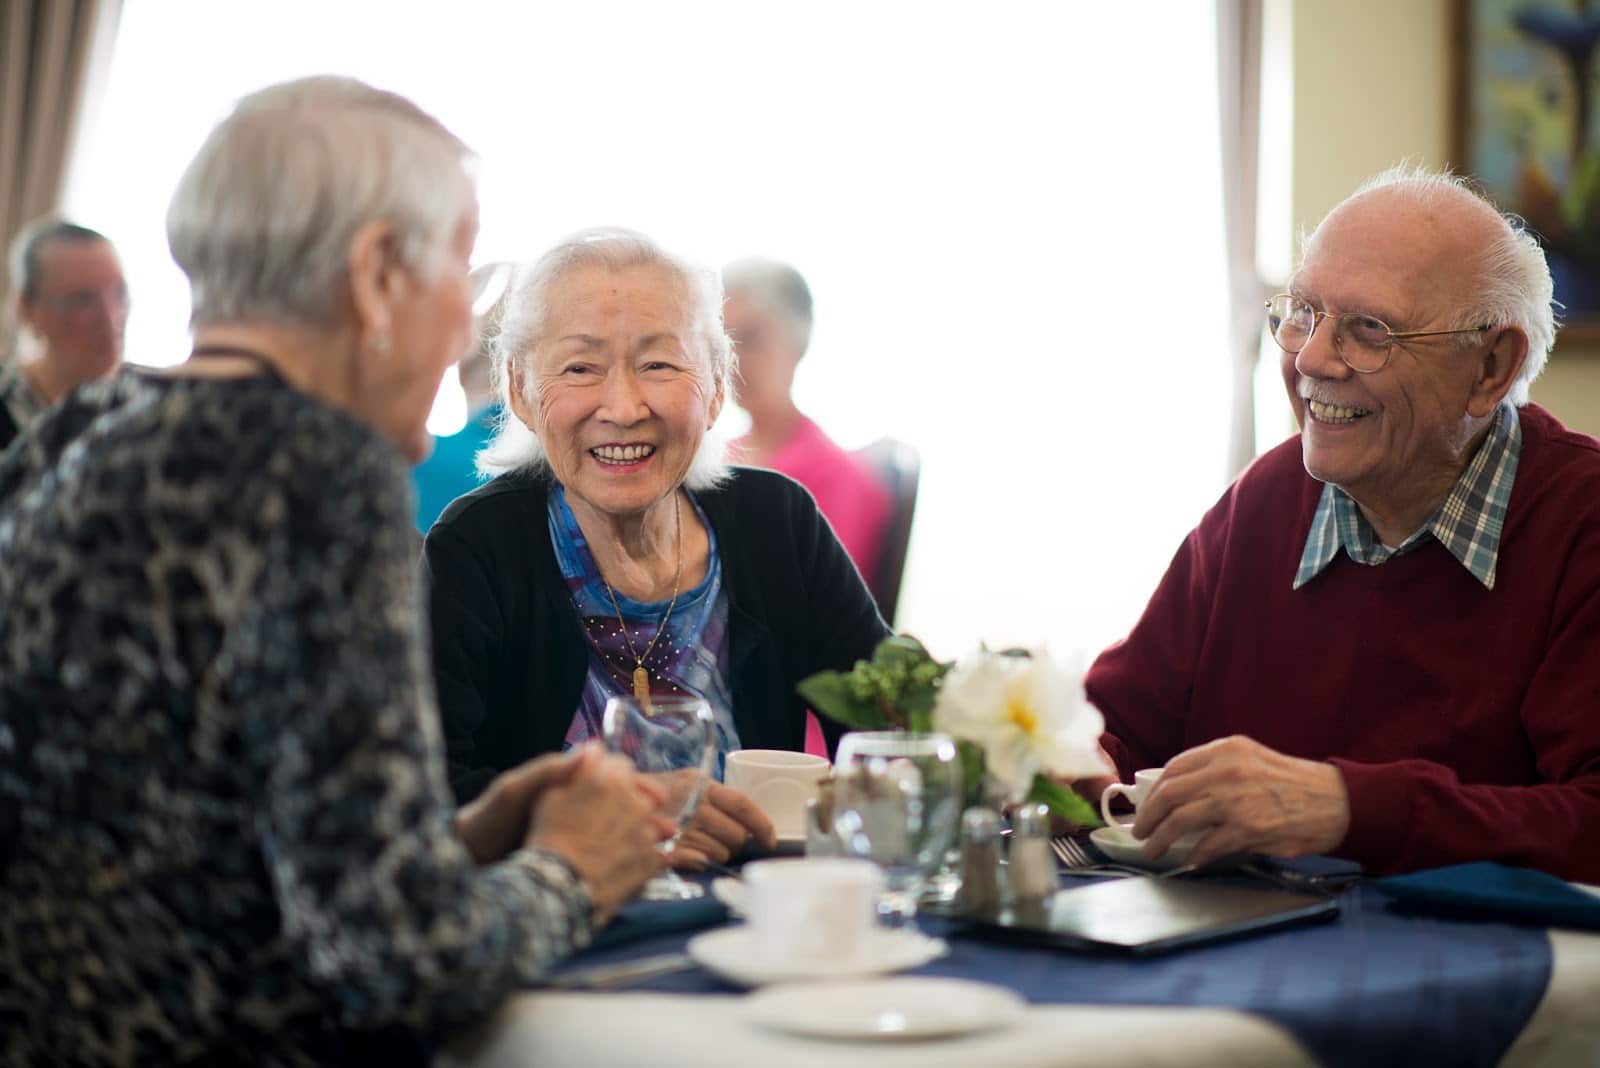 How to Find Affordable Senior Housing & Elder Care in 2022